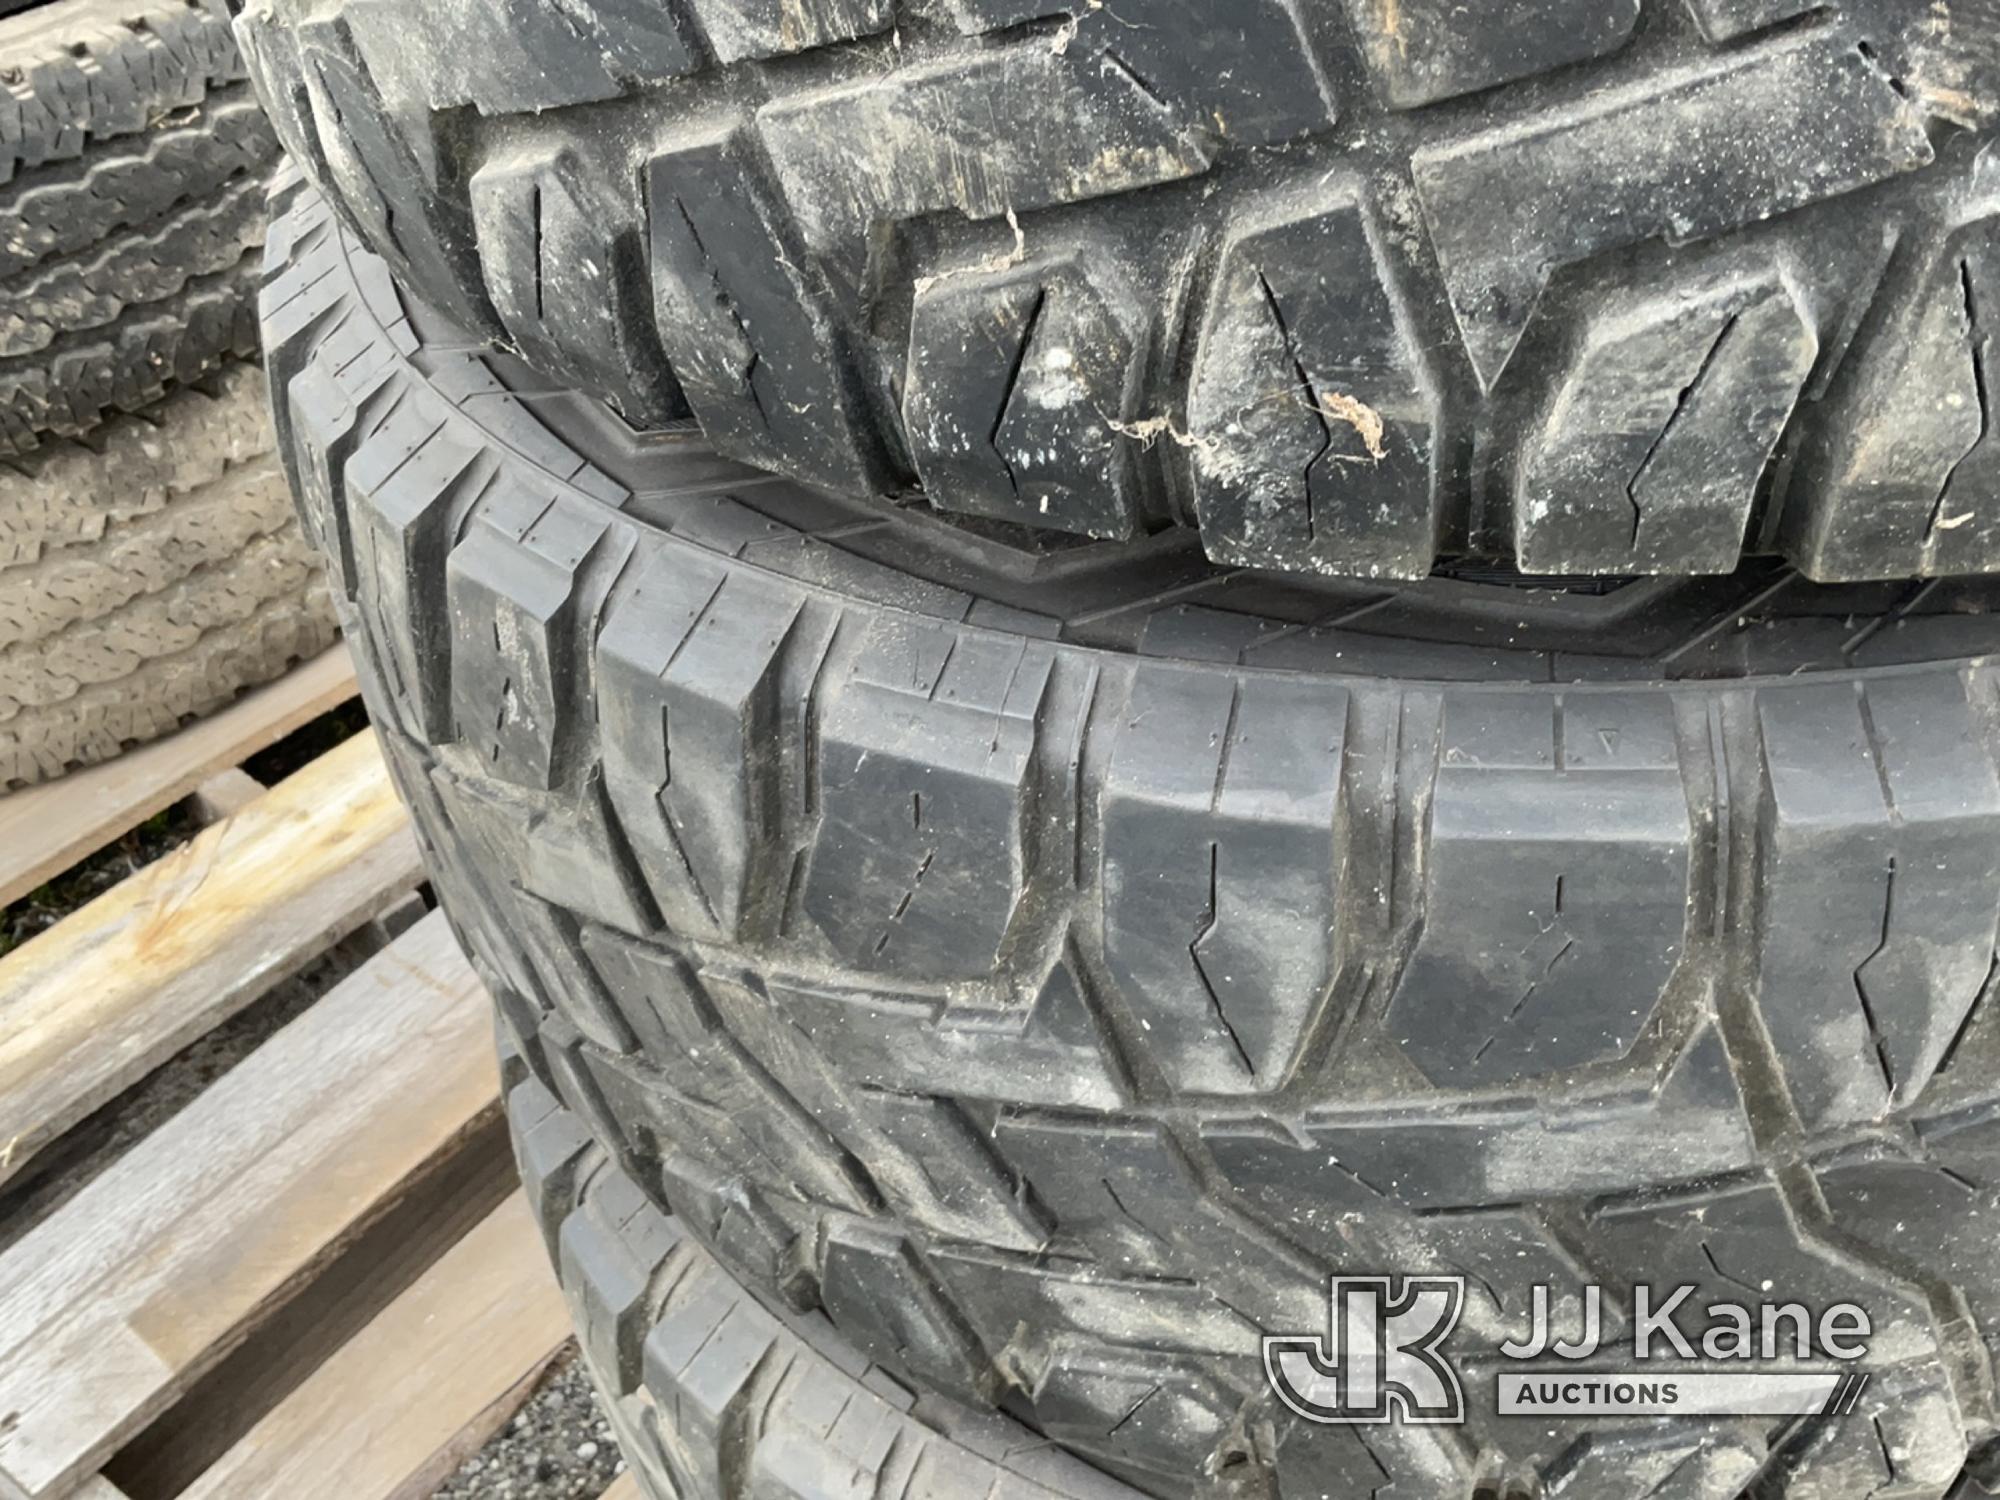 (Bowling Green, FL) 3 Used Toyo Tires - 35x12.50R18 NOTE: This unit is being sold AS IS/WHERE IS via